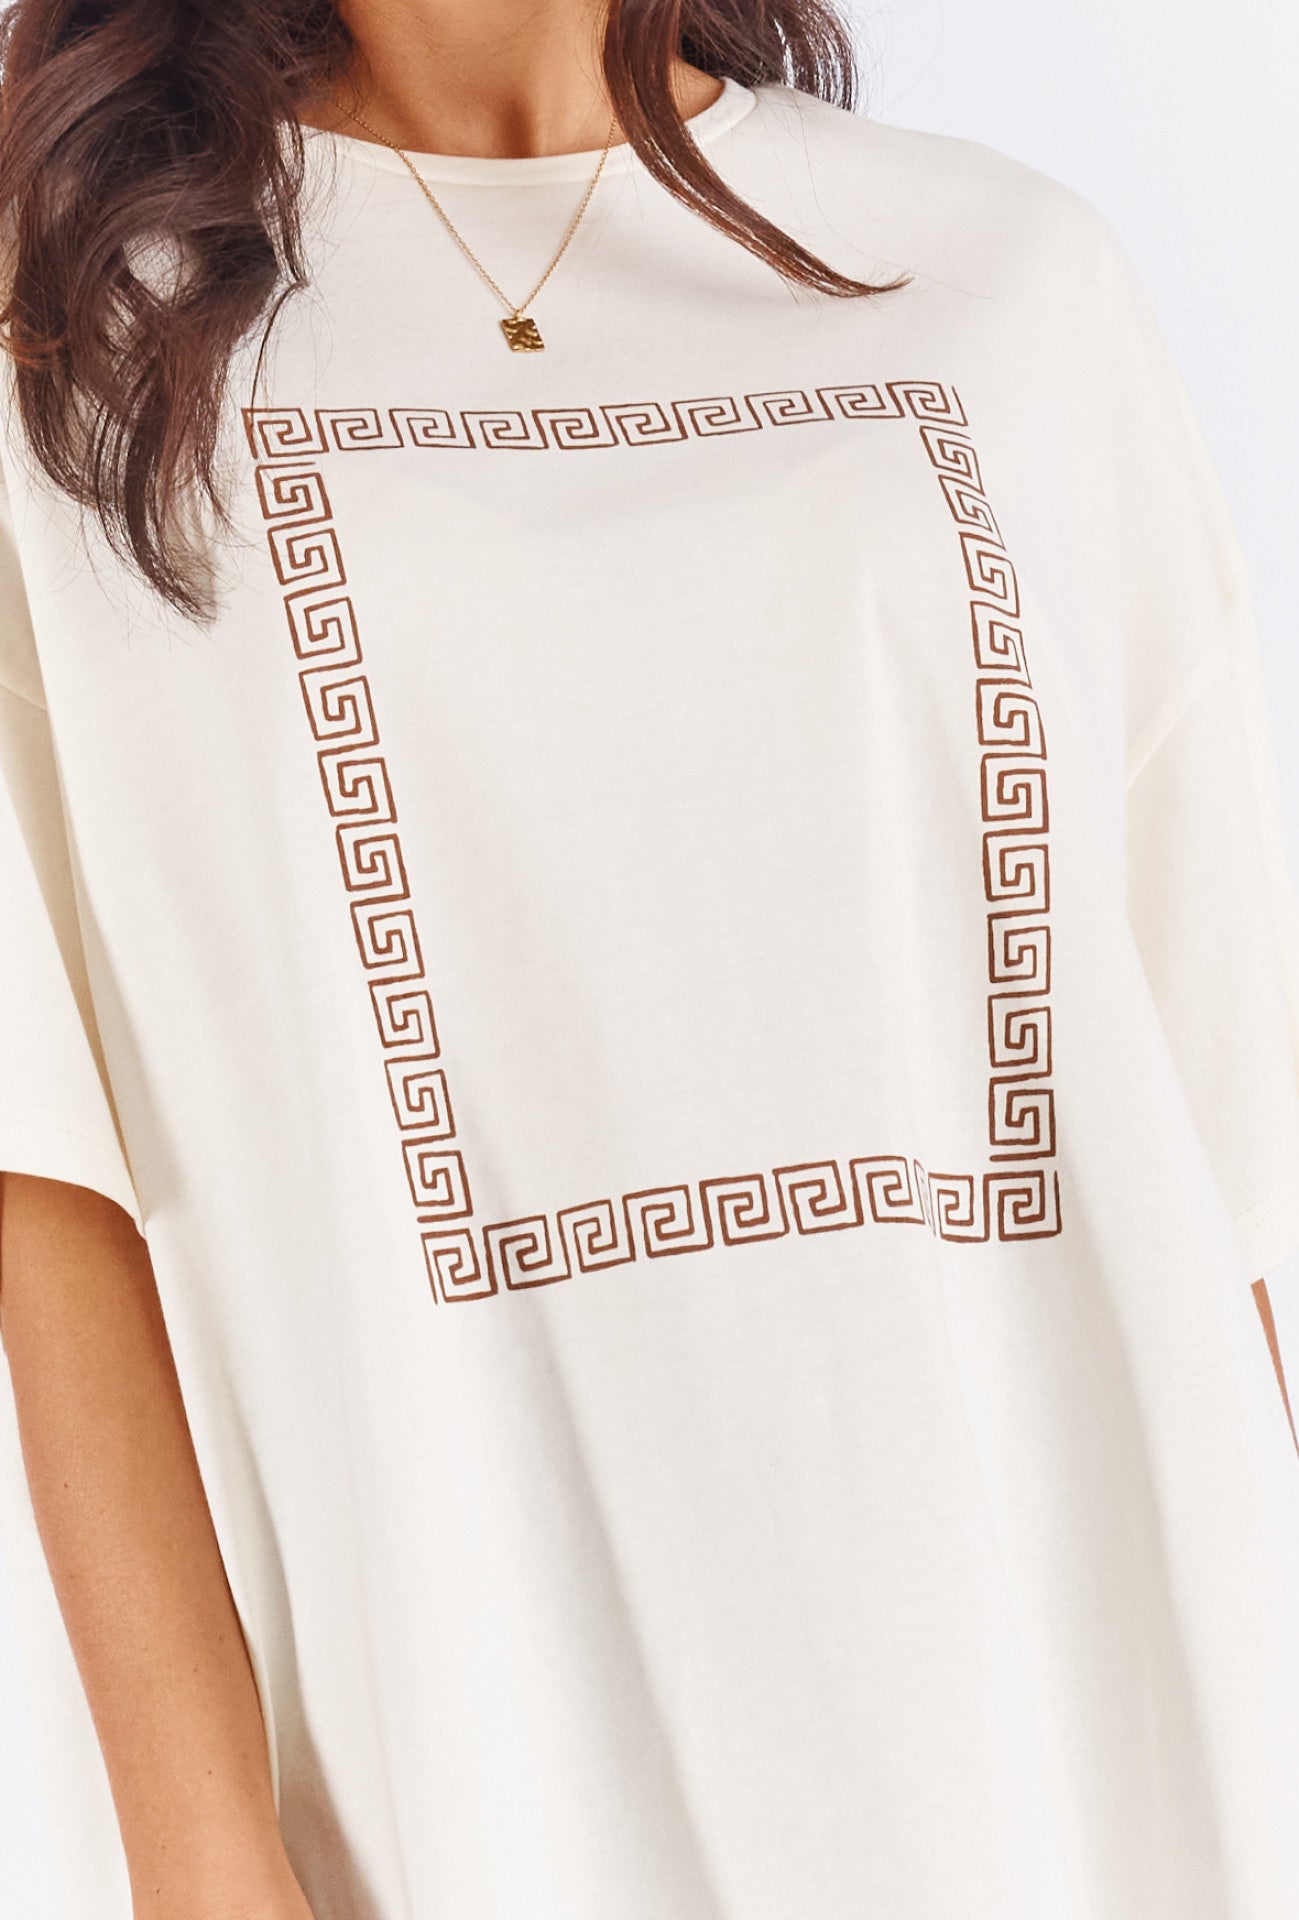 Meander Tee - Brown and Cream